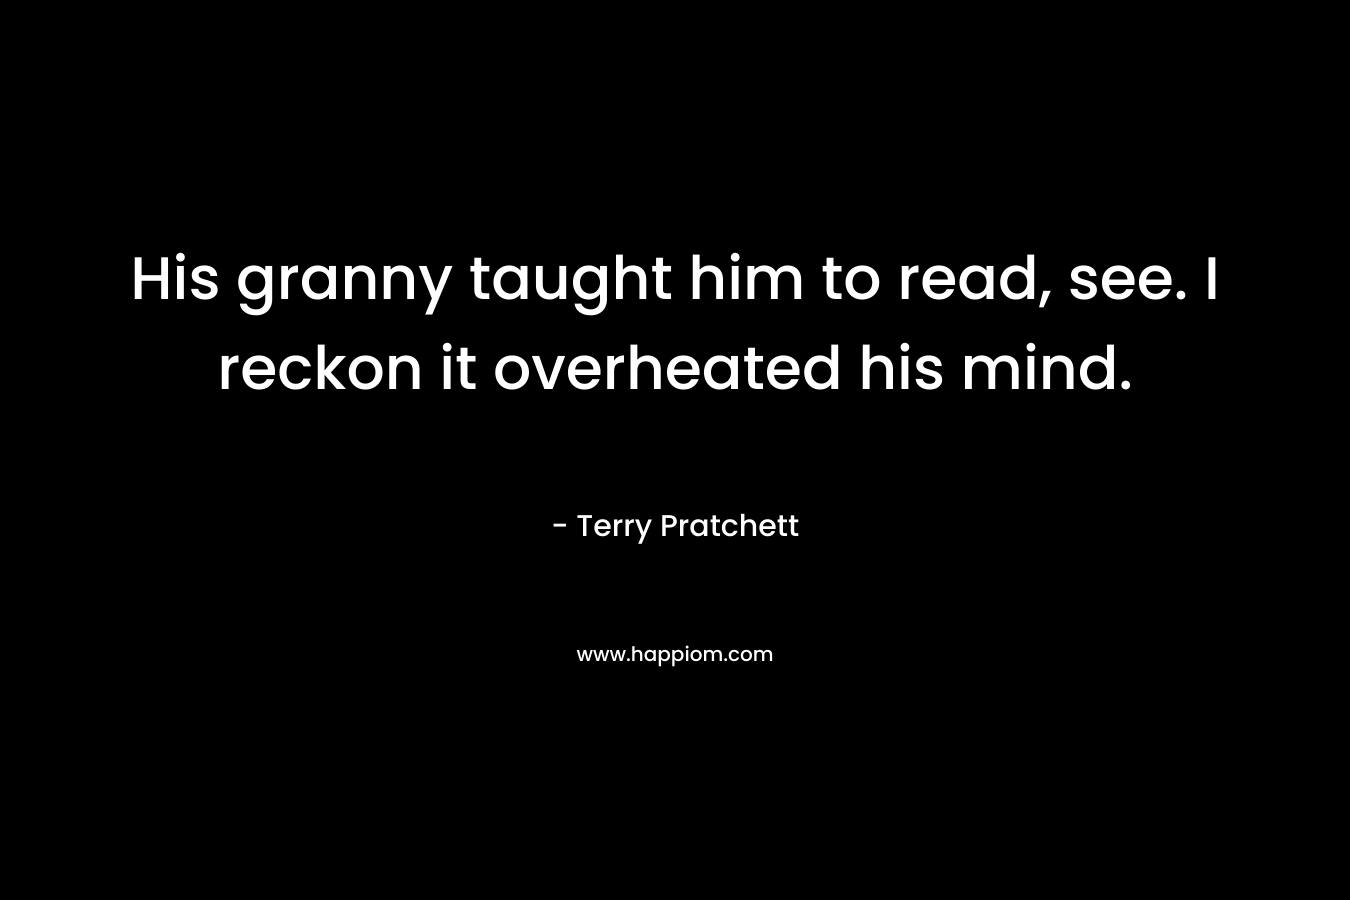 His granny taught him to read, see. I reckon it overheated his mind. – Terry Pratchett